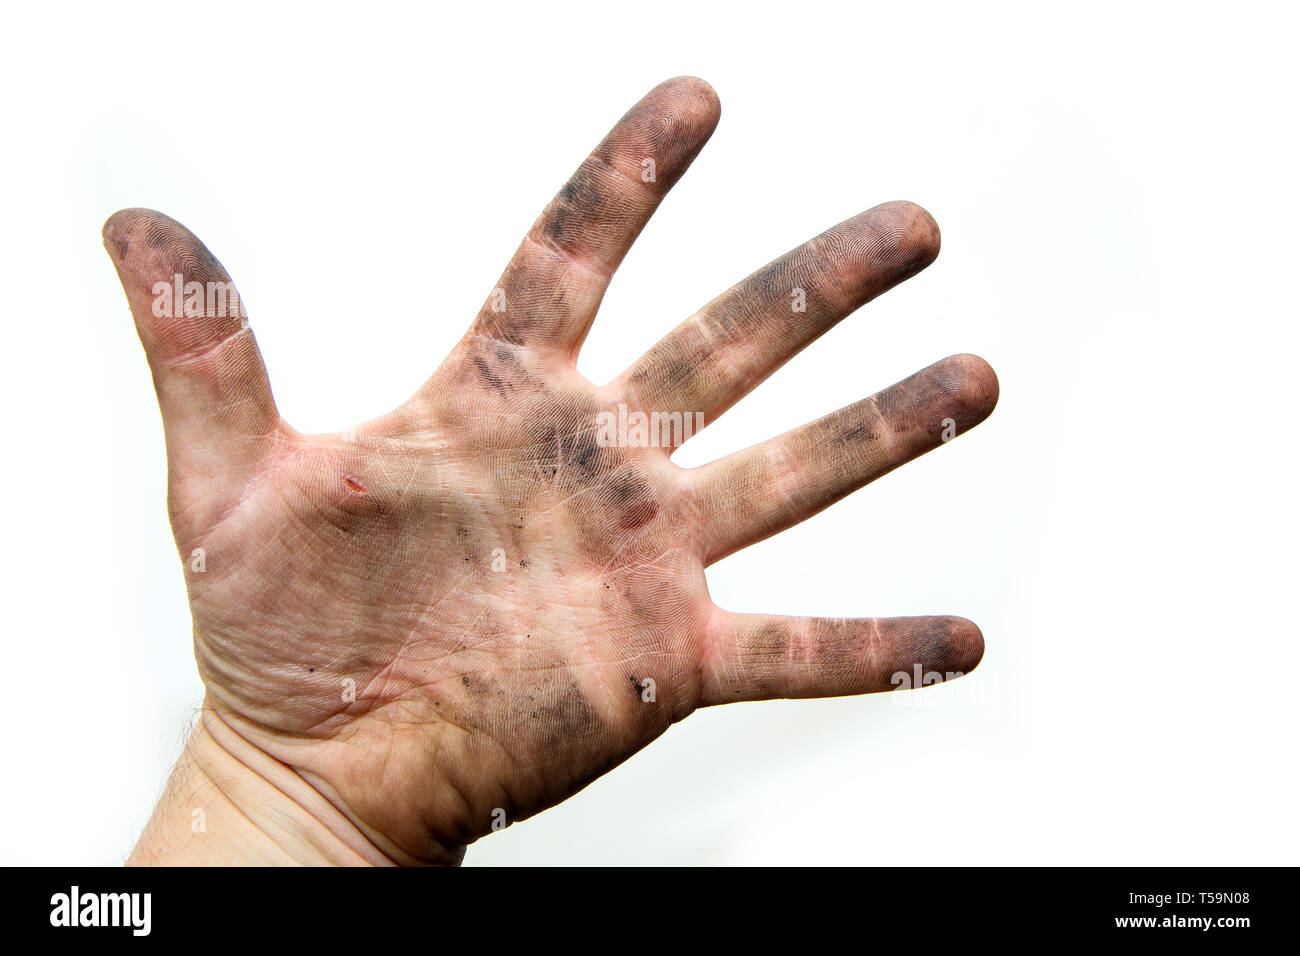 A picture of dirty hands of a man, soiled by oil and  vaseline. Isolated on a white background. Stock Photo